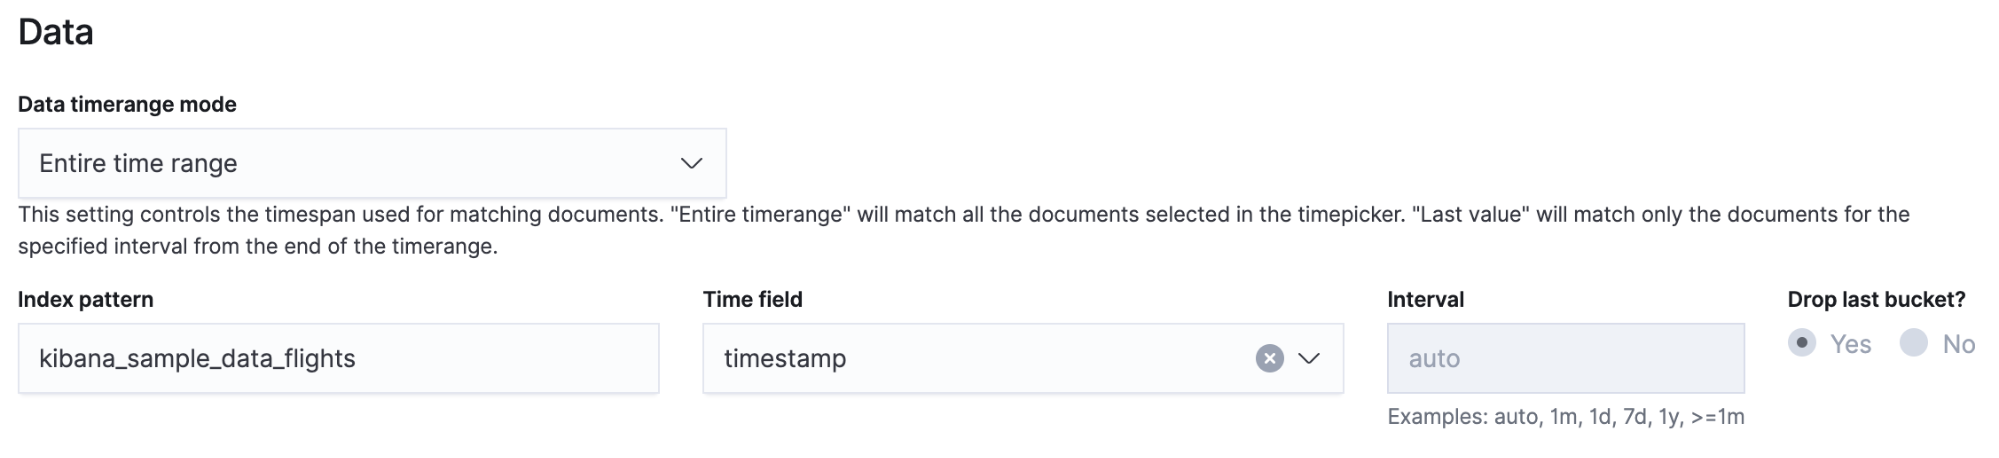 Set Time field to timestamp